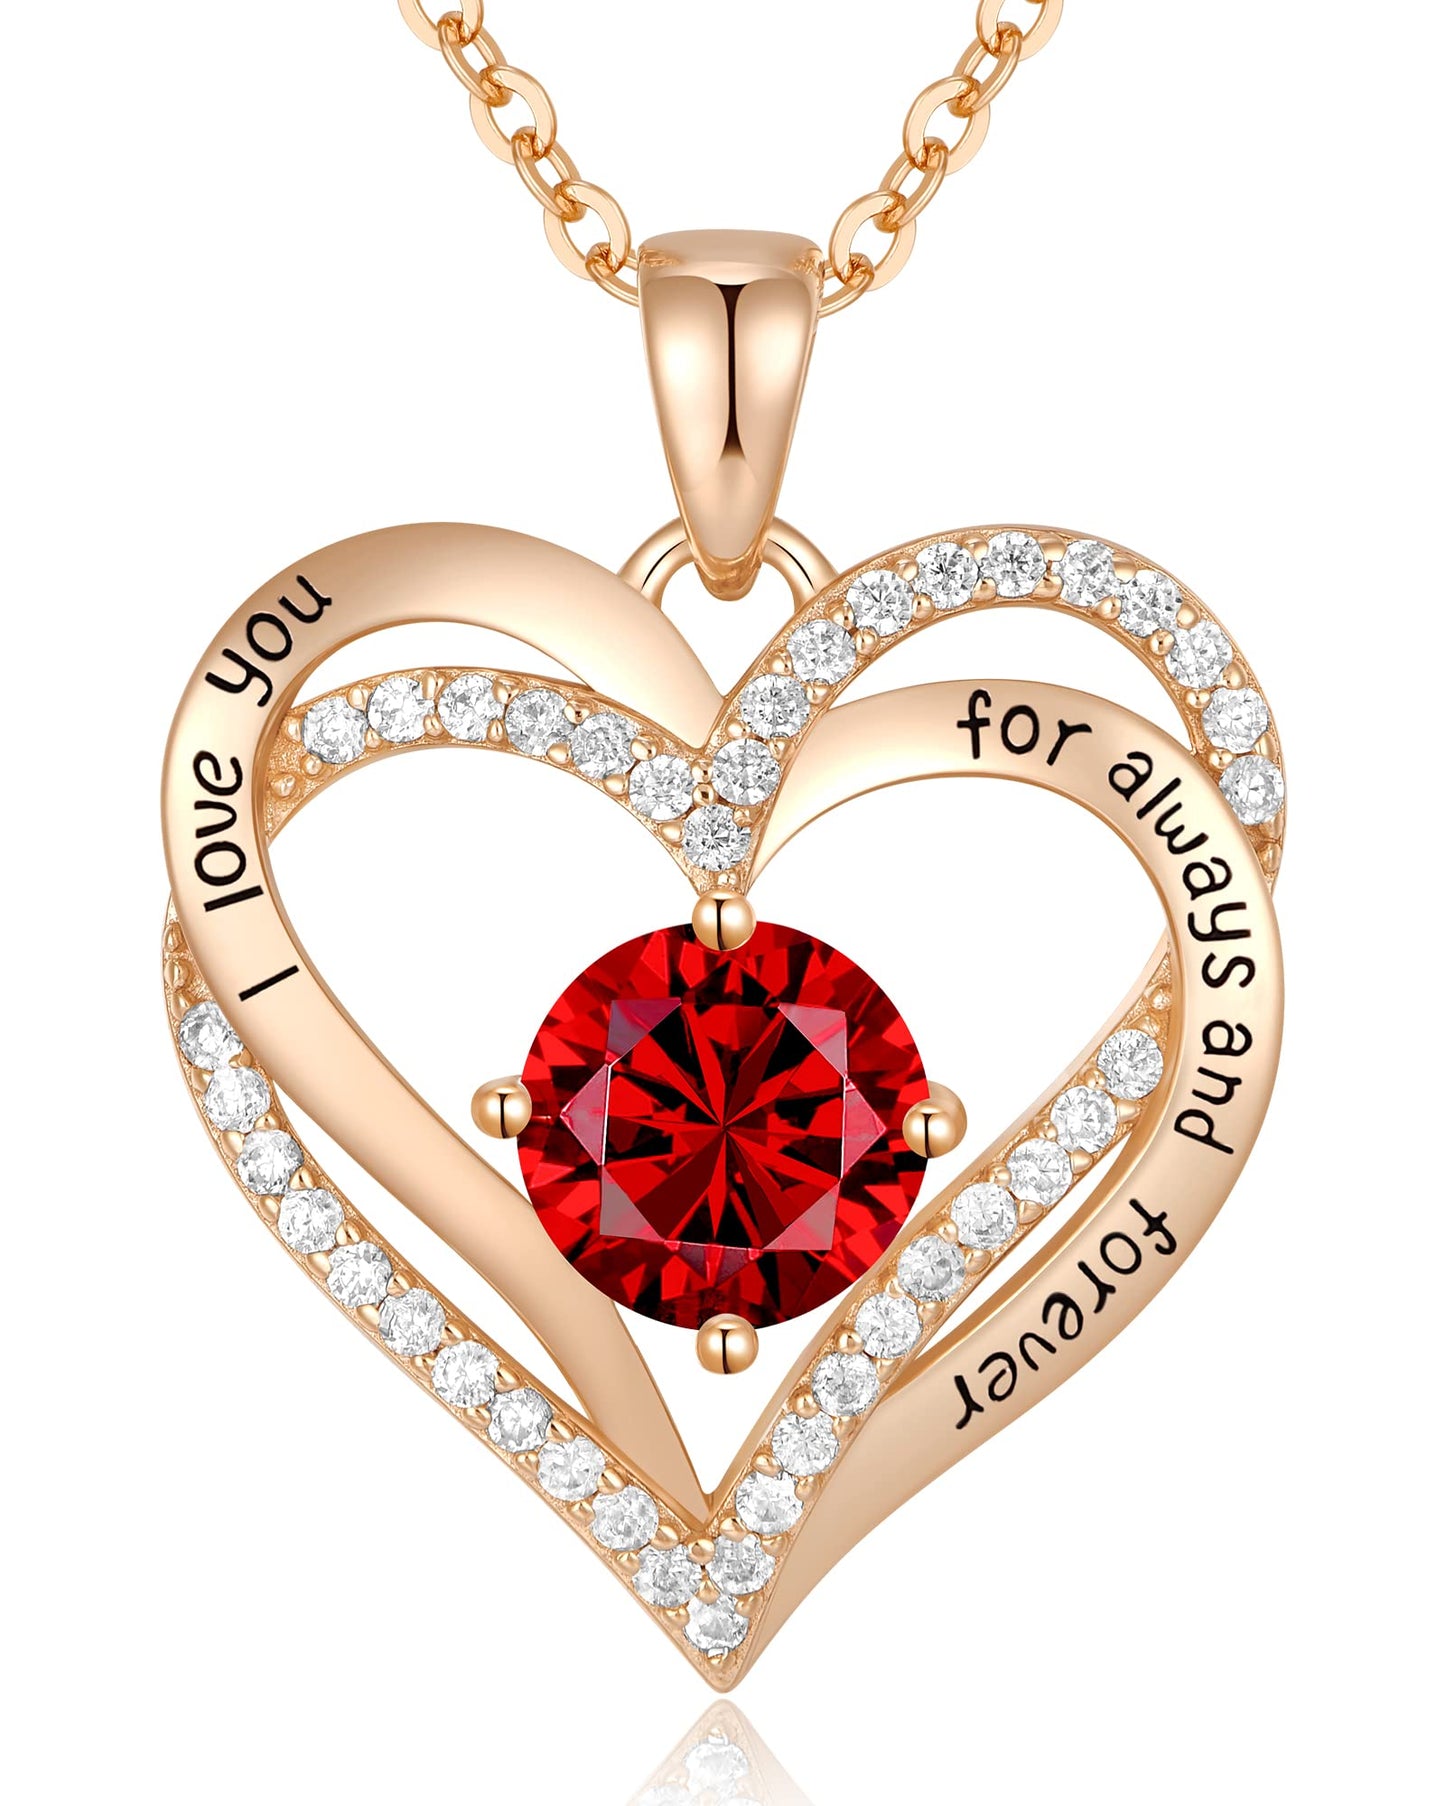 I Love You Necklace Birthstone Necklace For Your Lover